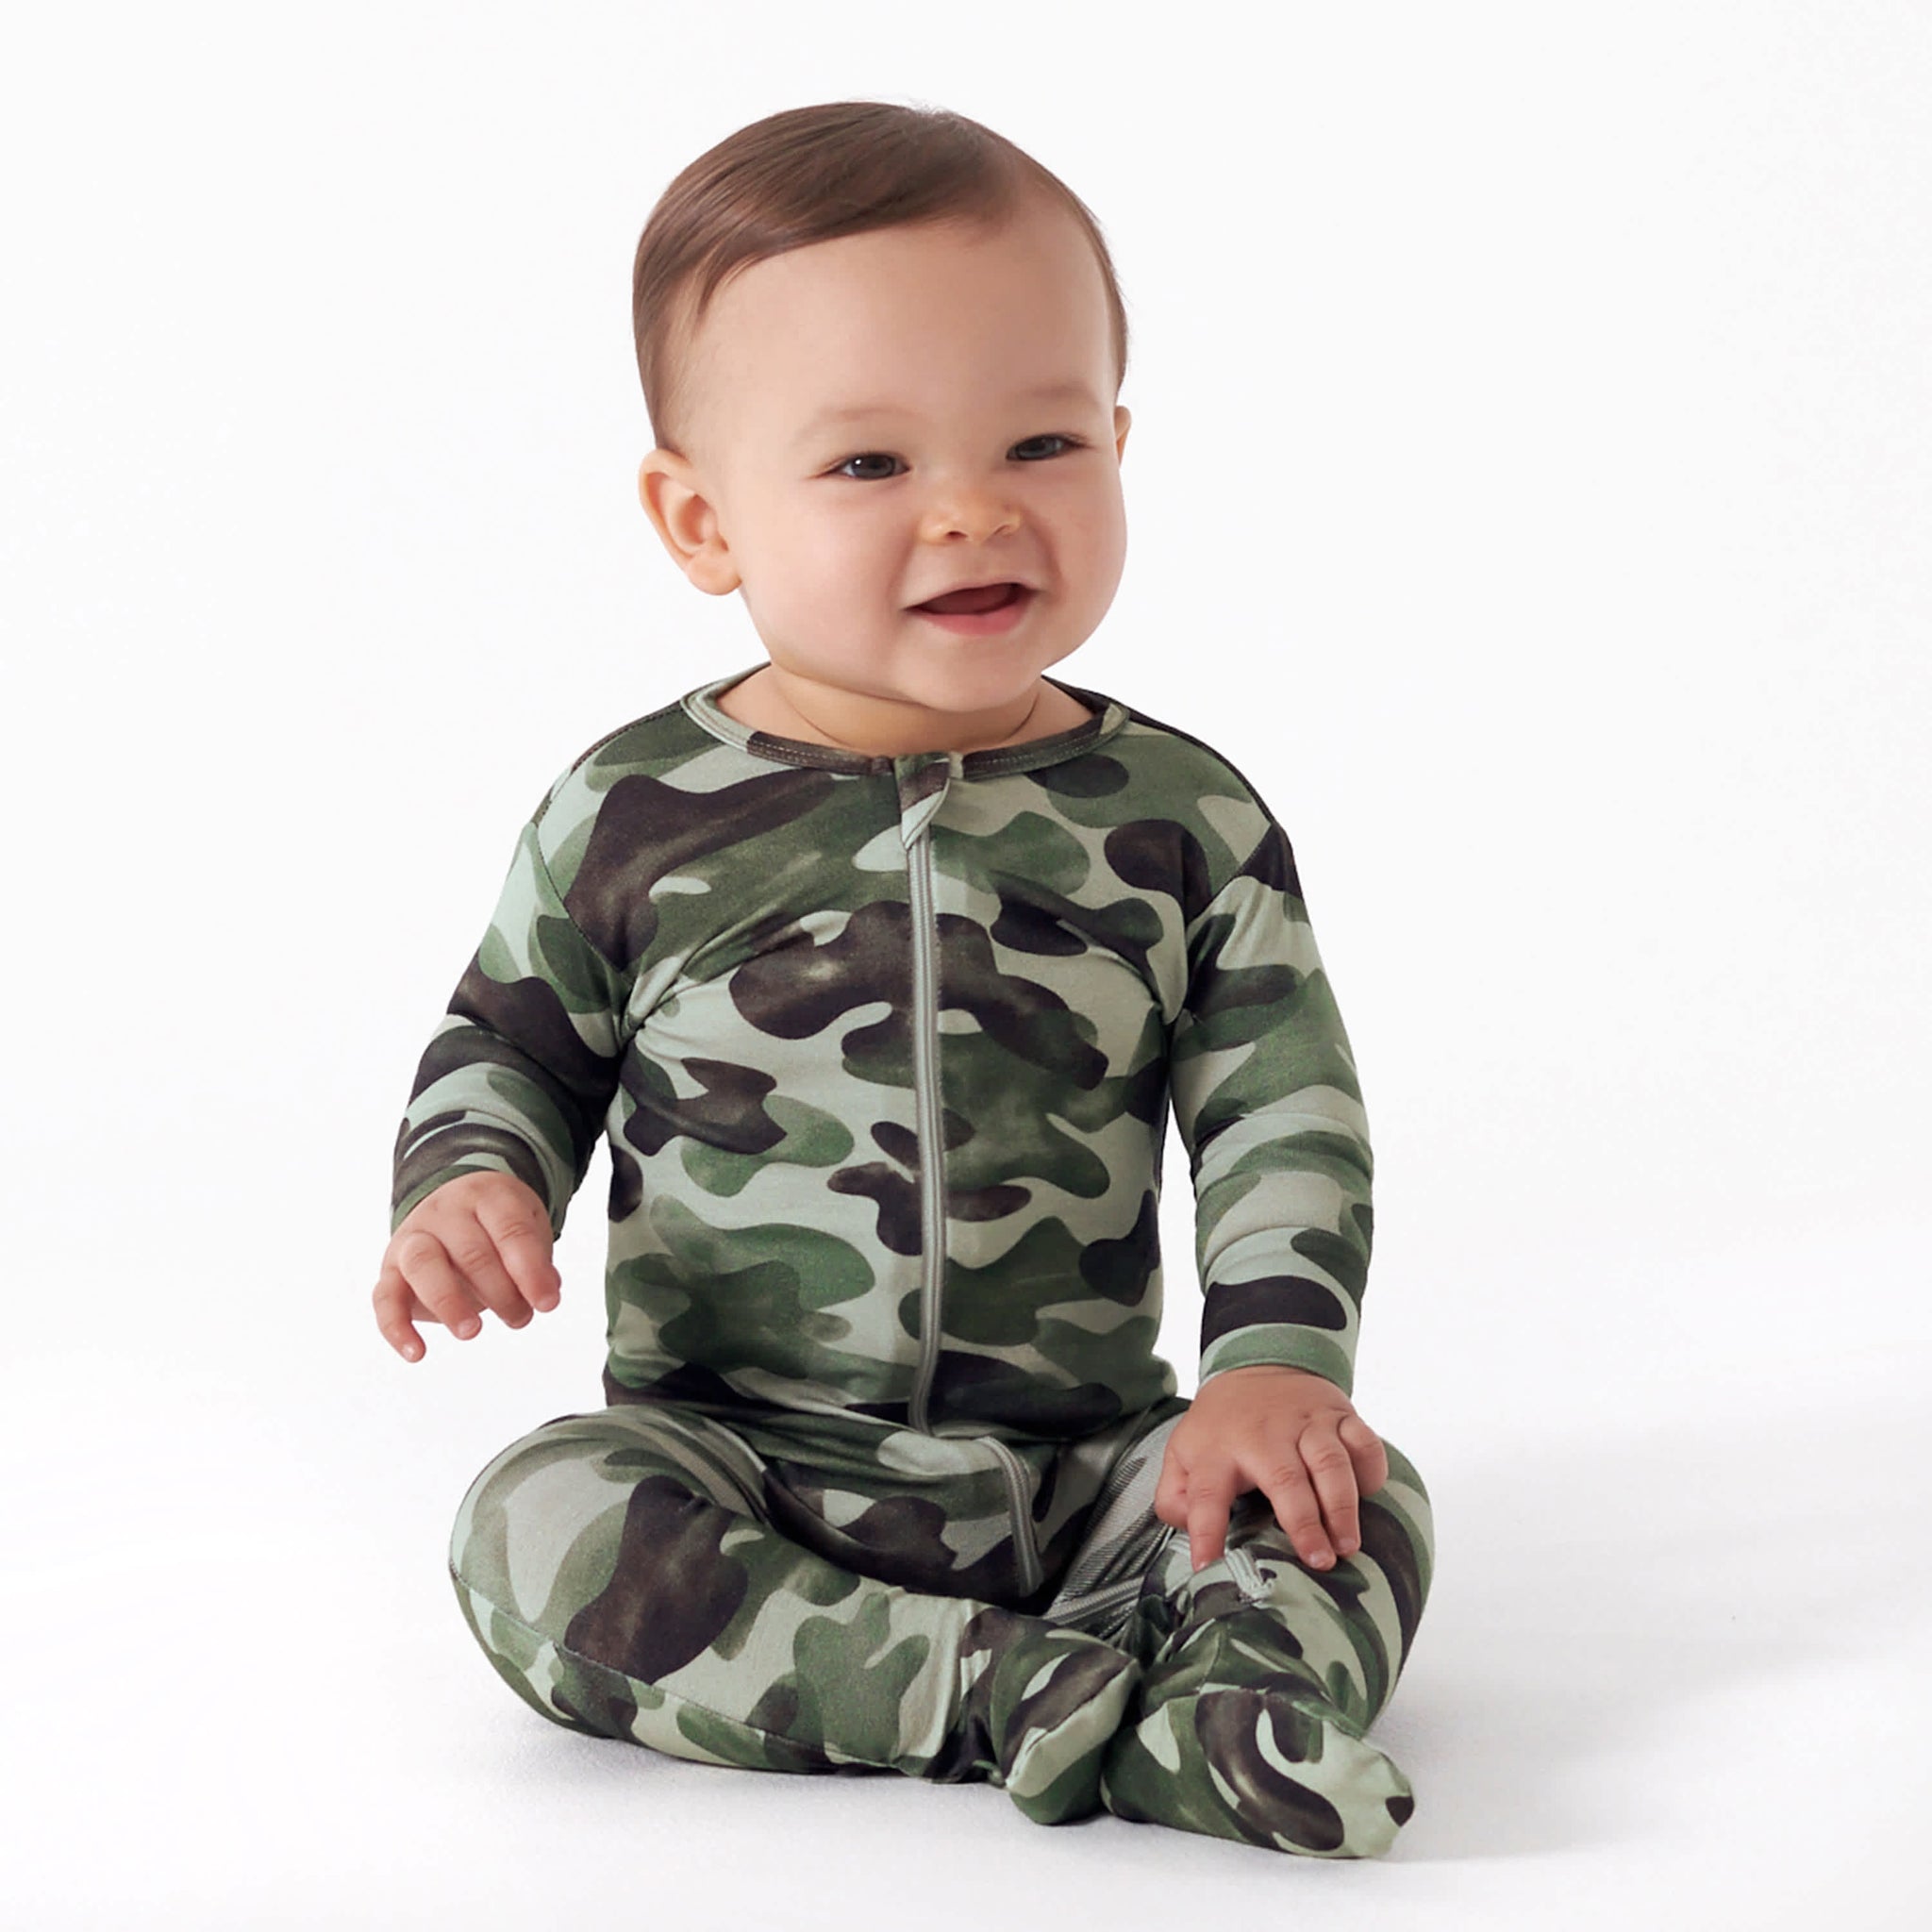 Baby & Toddler Hide & Seek Camo Buttery Soft Viscose Made from Eucalyptus Snug Fit Footed Pajamas-Gerber Childrenswear Wholesale